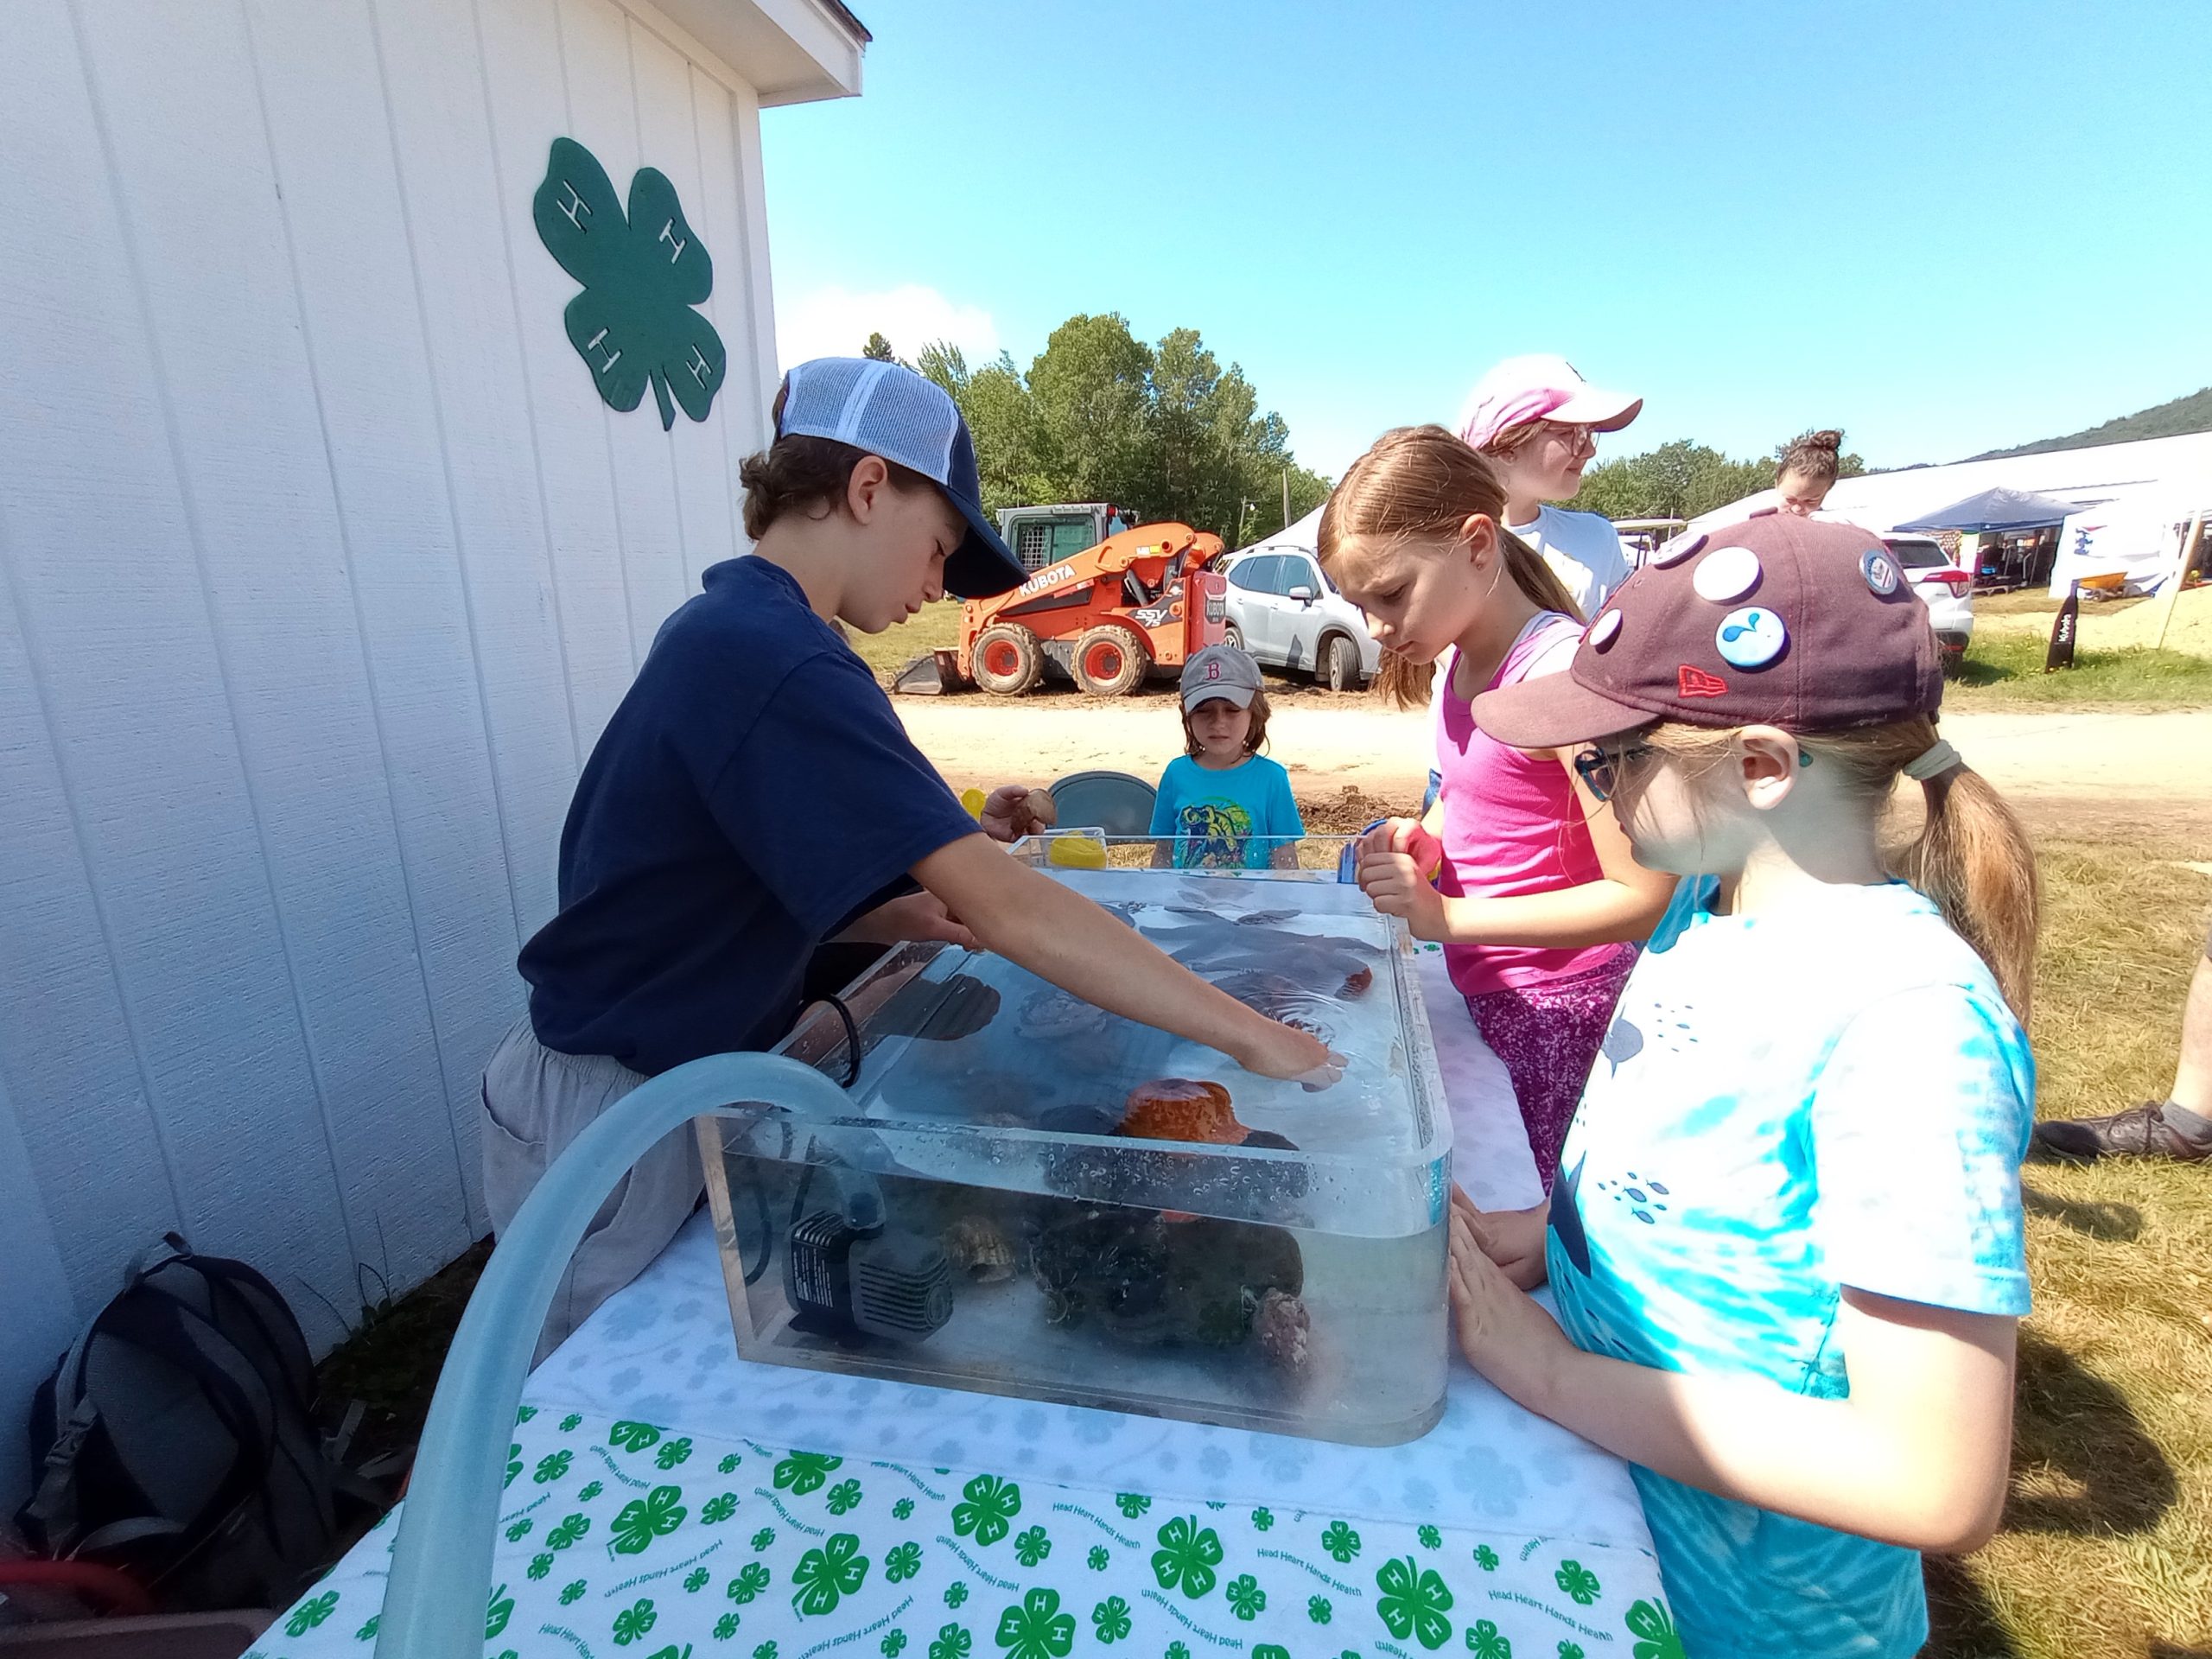 Youth gathered around the 4-H Touch Tank exhibit at the Blue Hill Fair, observing the sea creatures